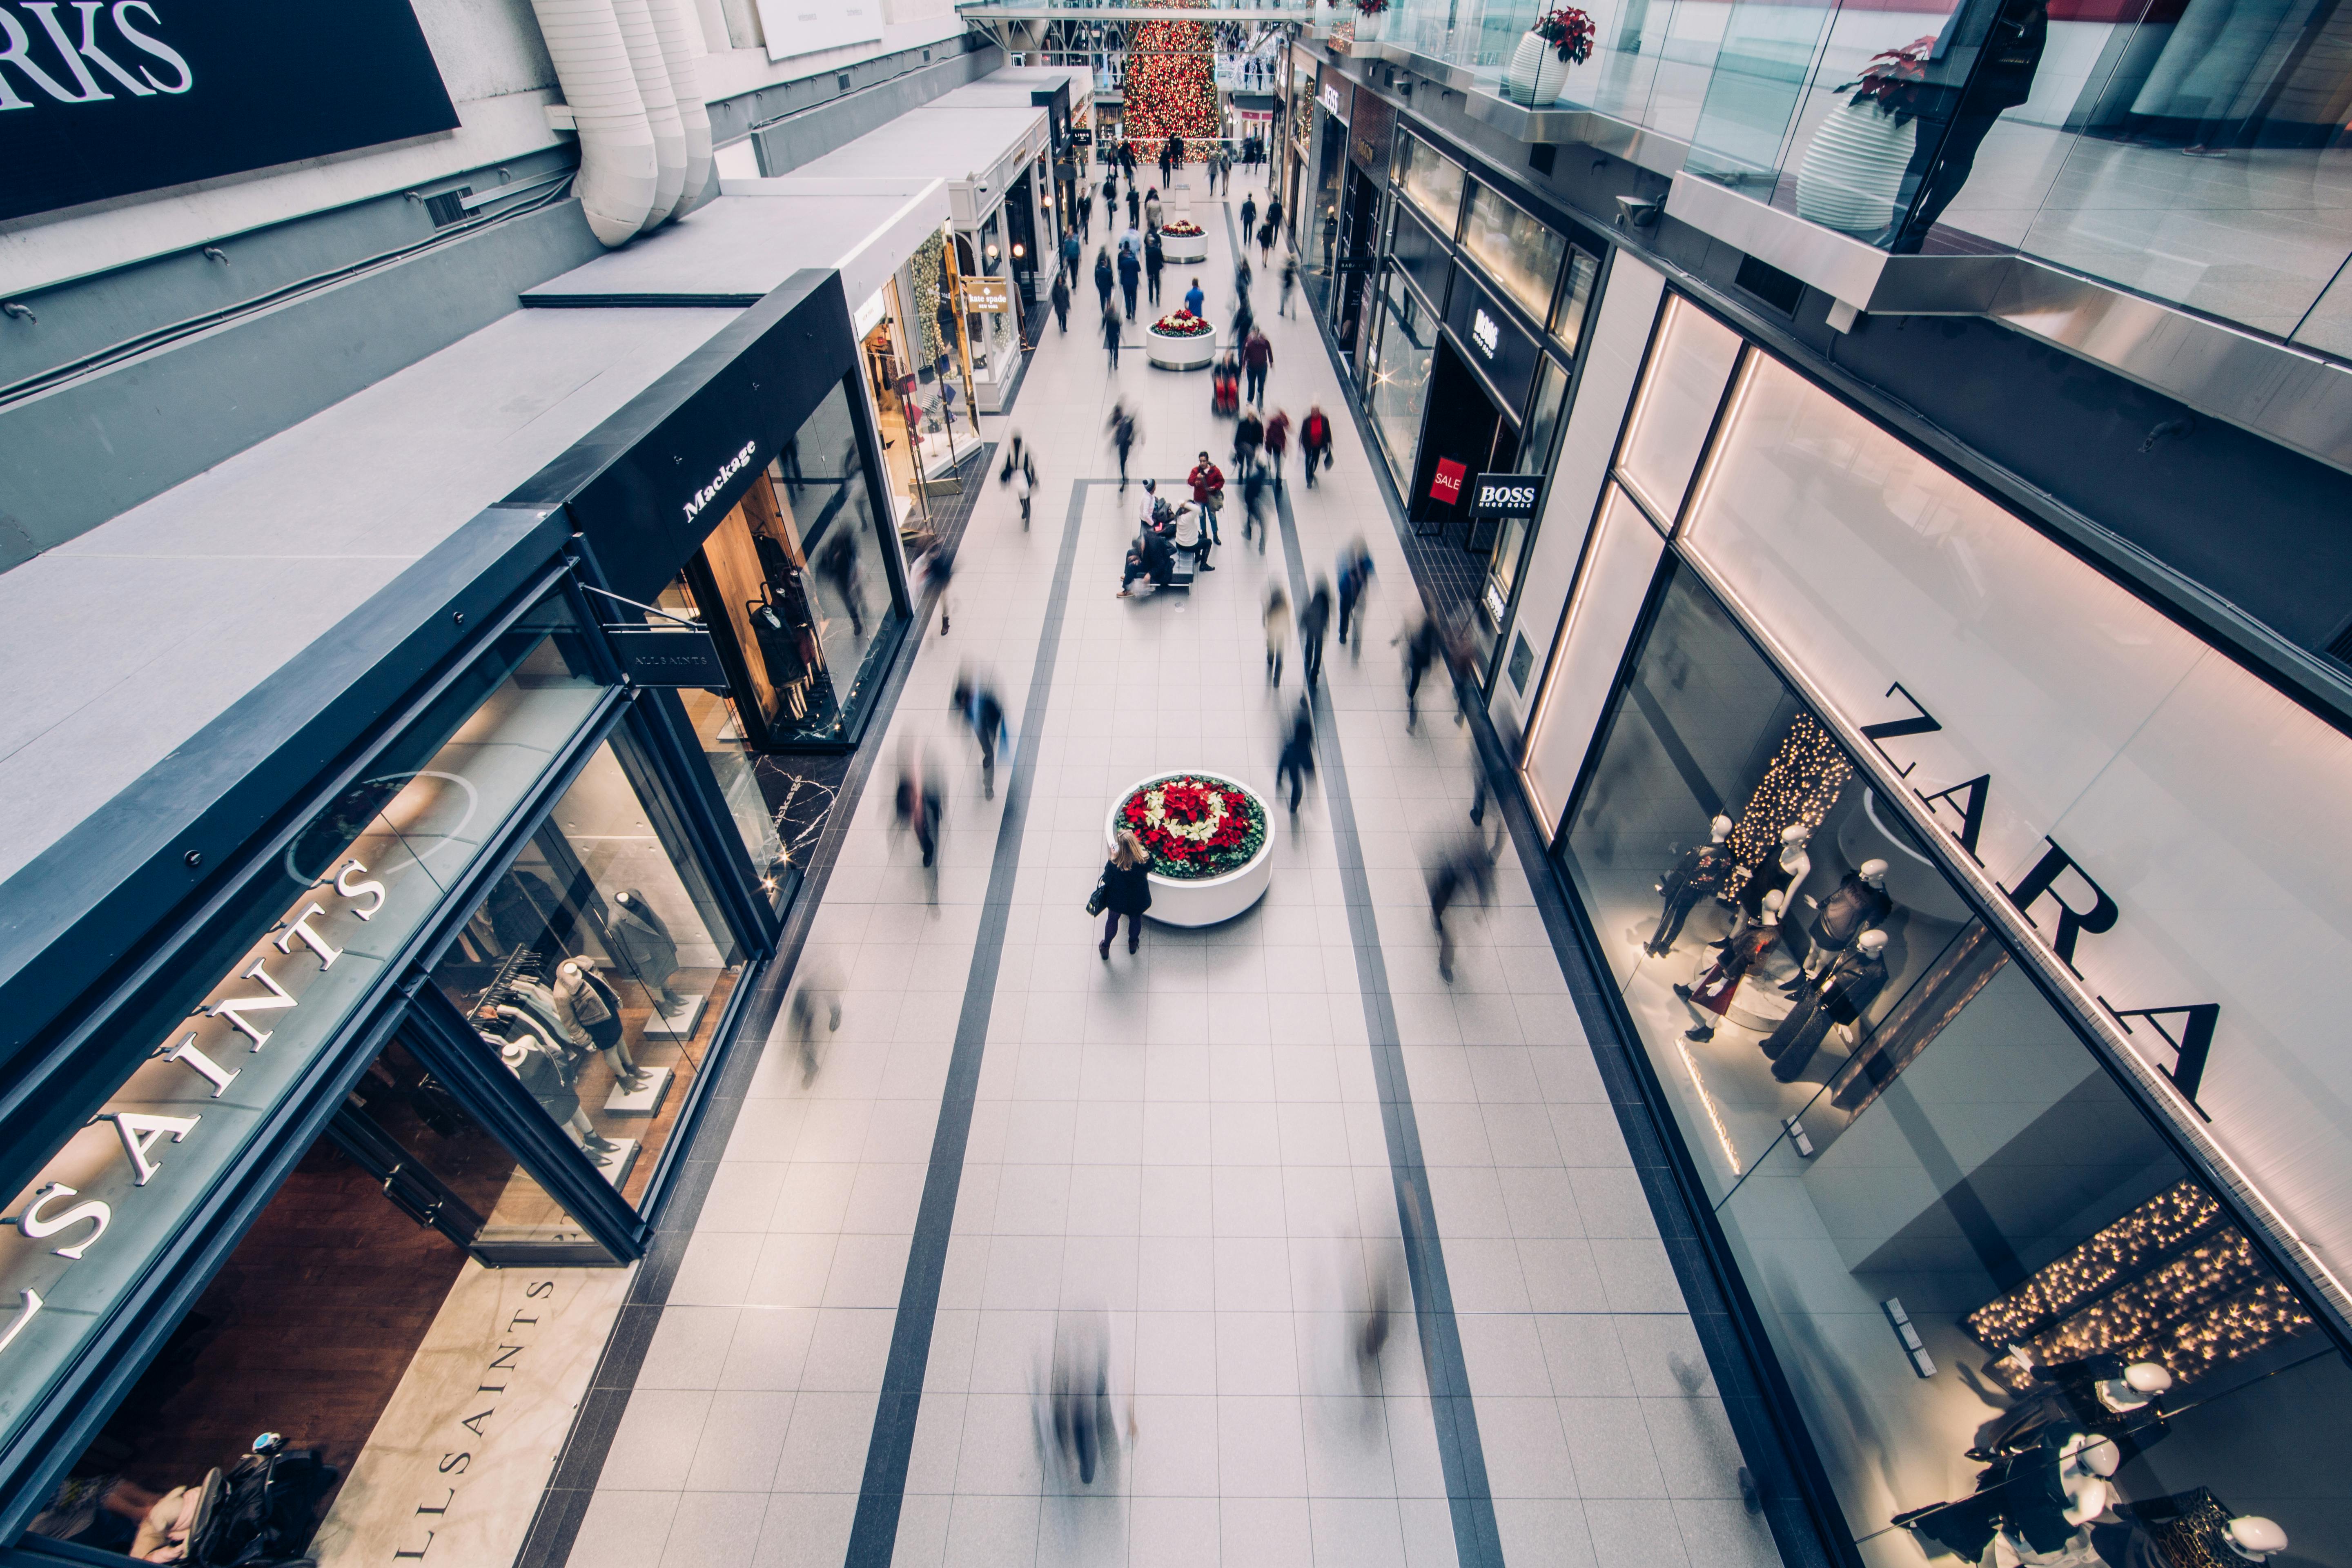 Group of people inside the mall. | Photo: Pexels